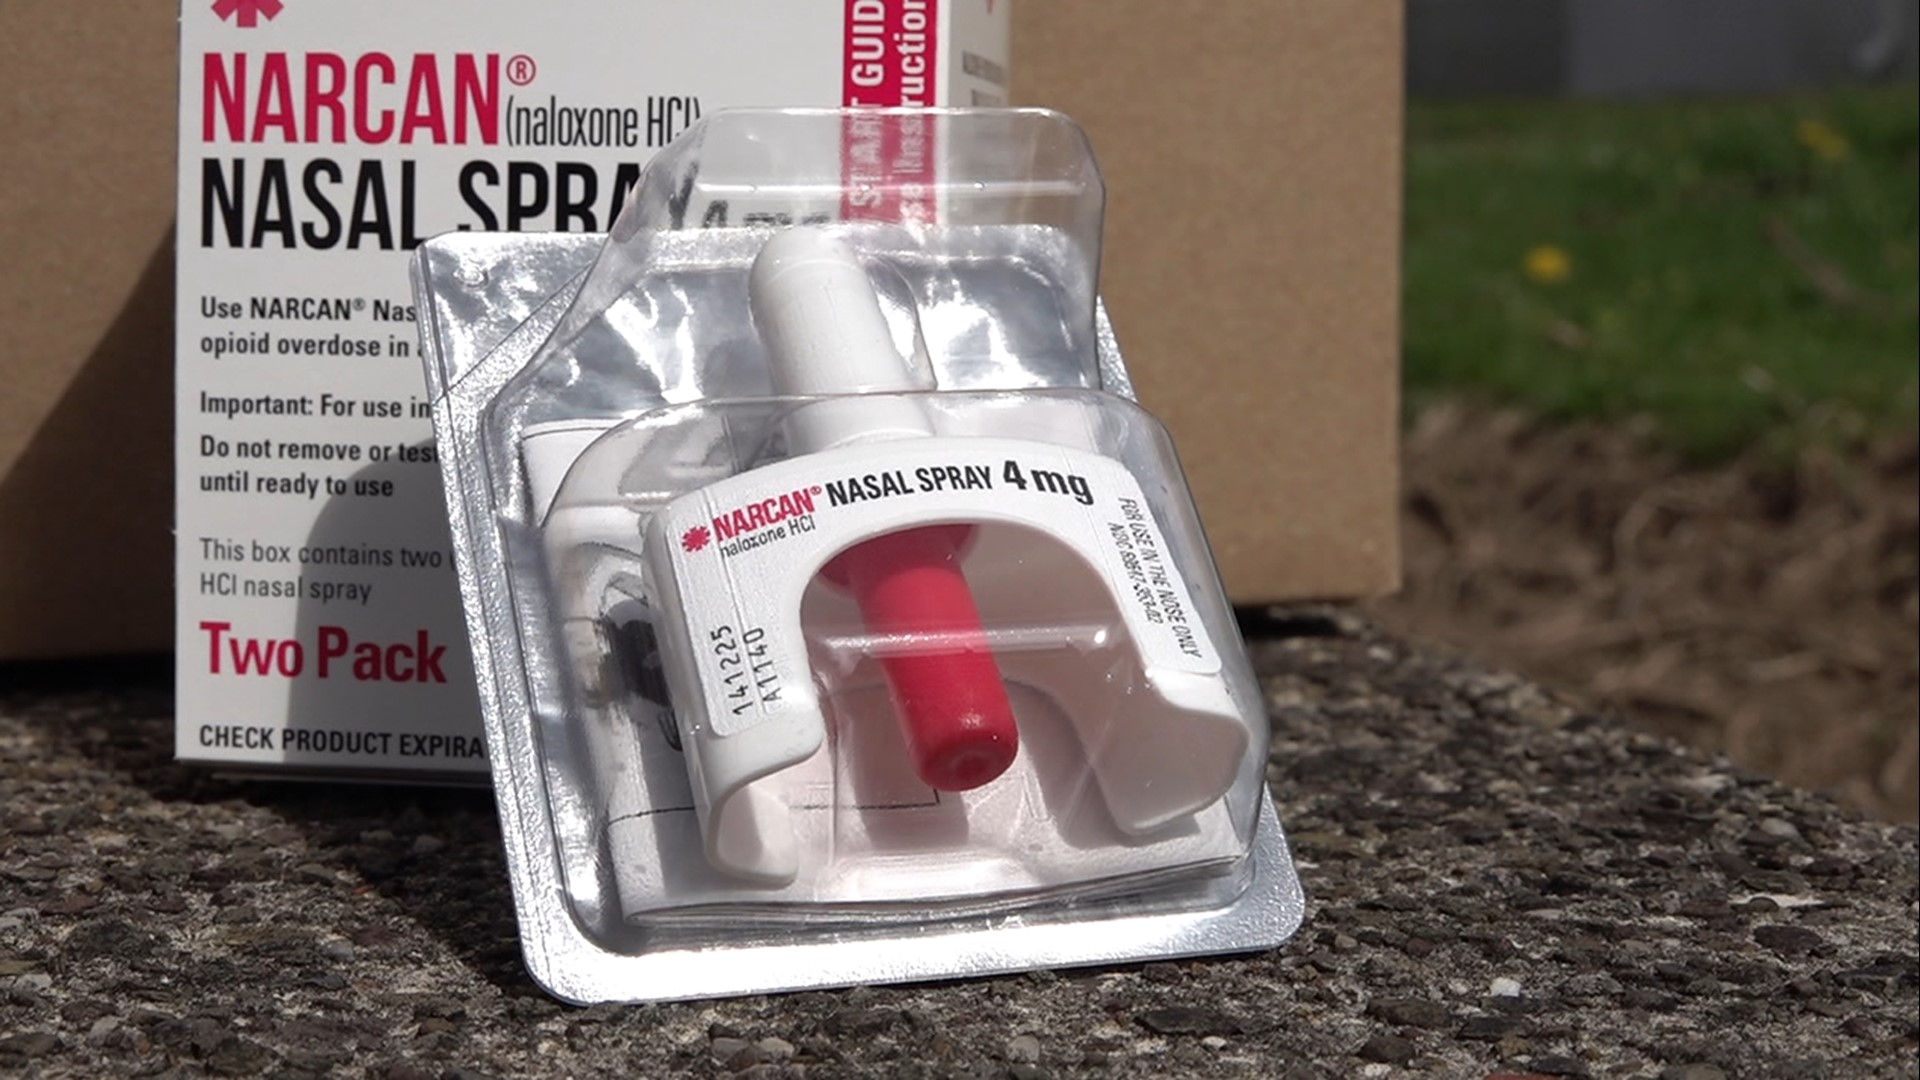 We told you about the Narcan boxes getting installed throughout Columbia County  back in February. We checked in to see how the effort is going.